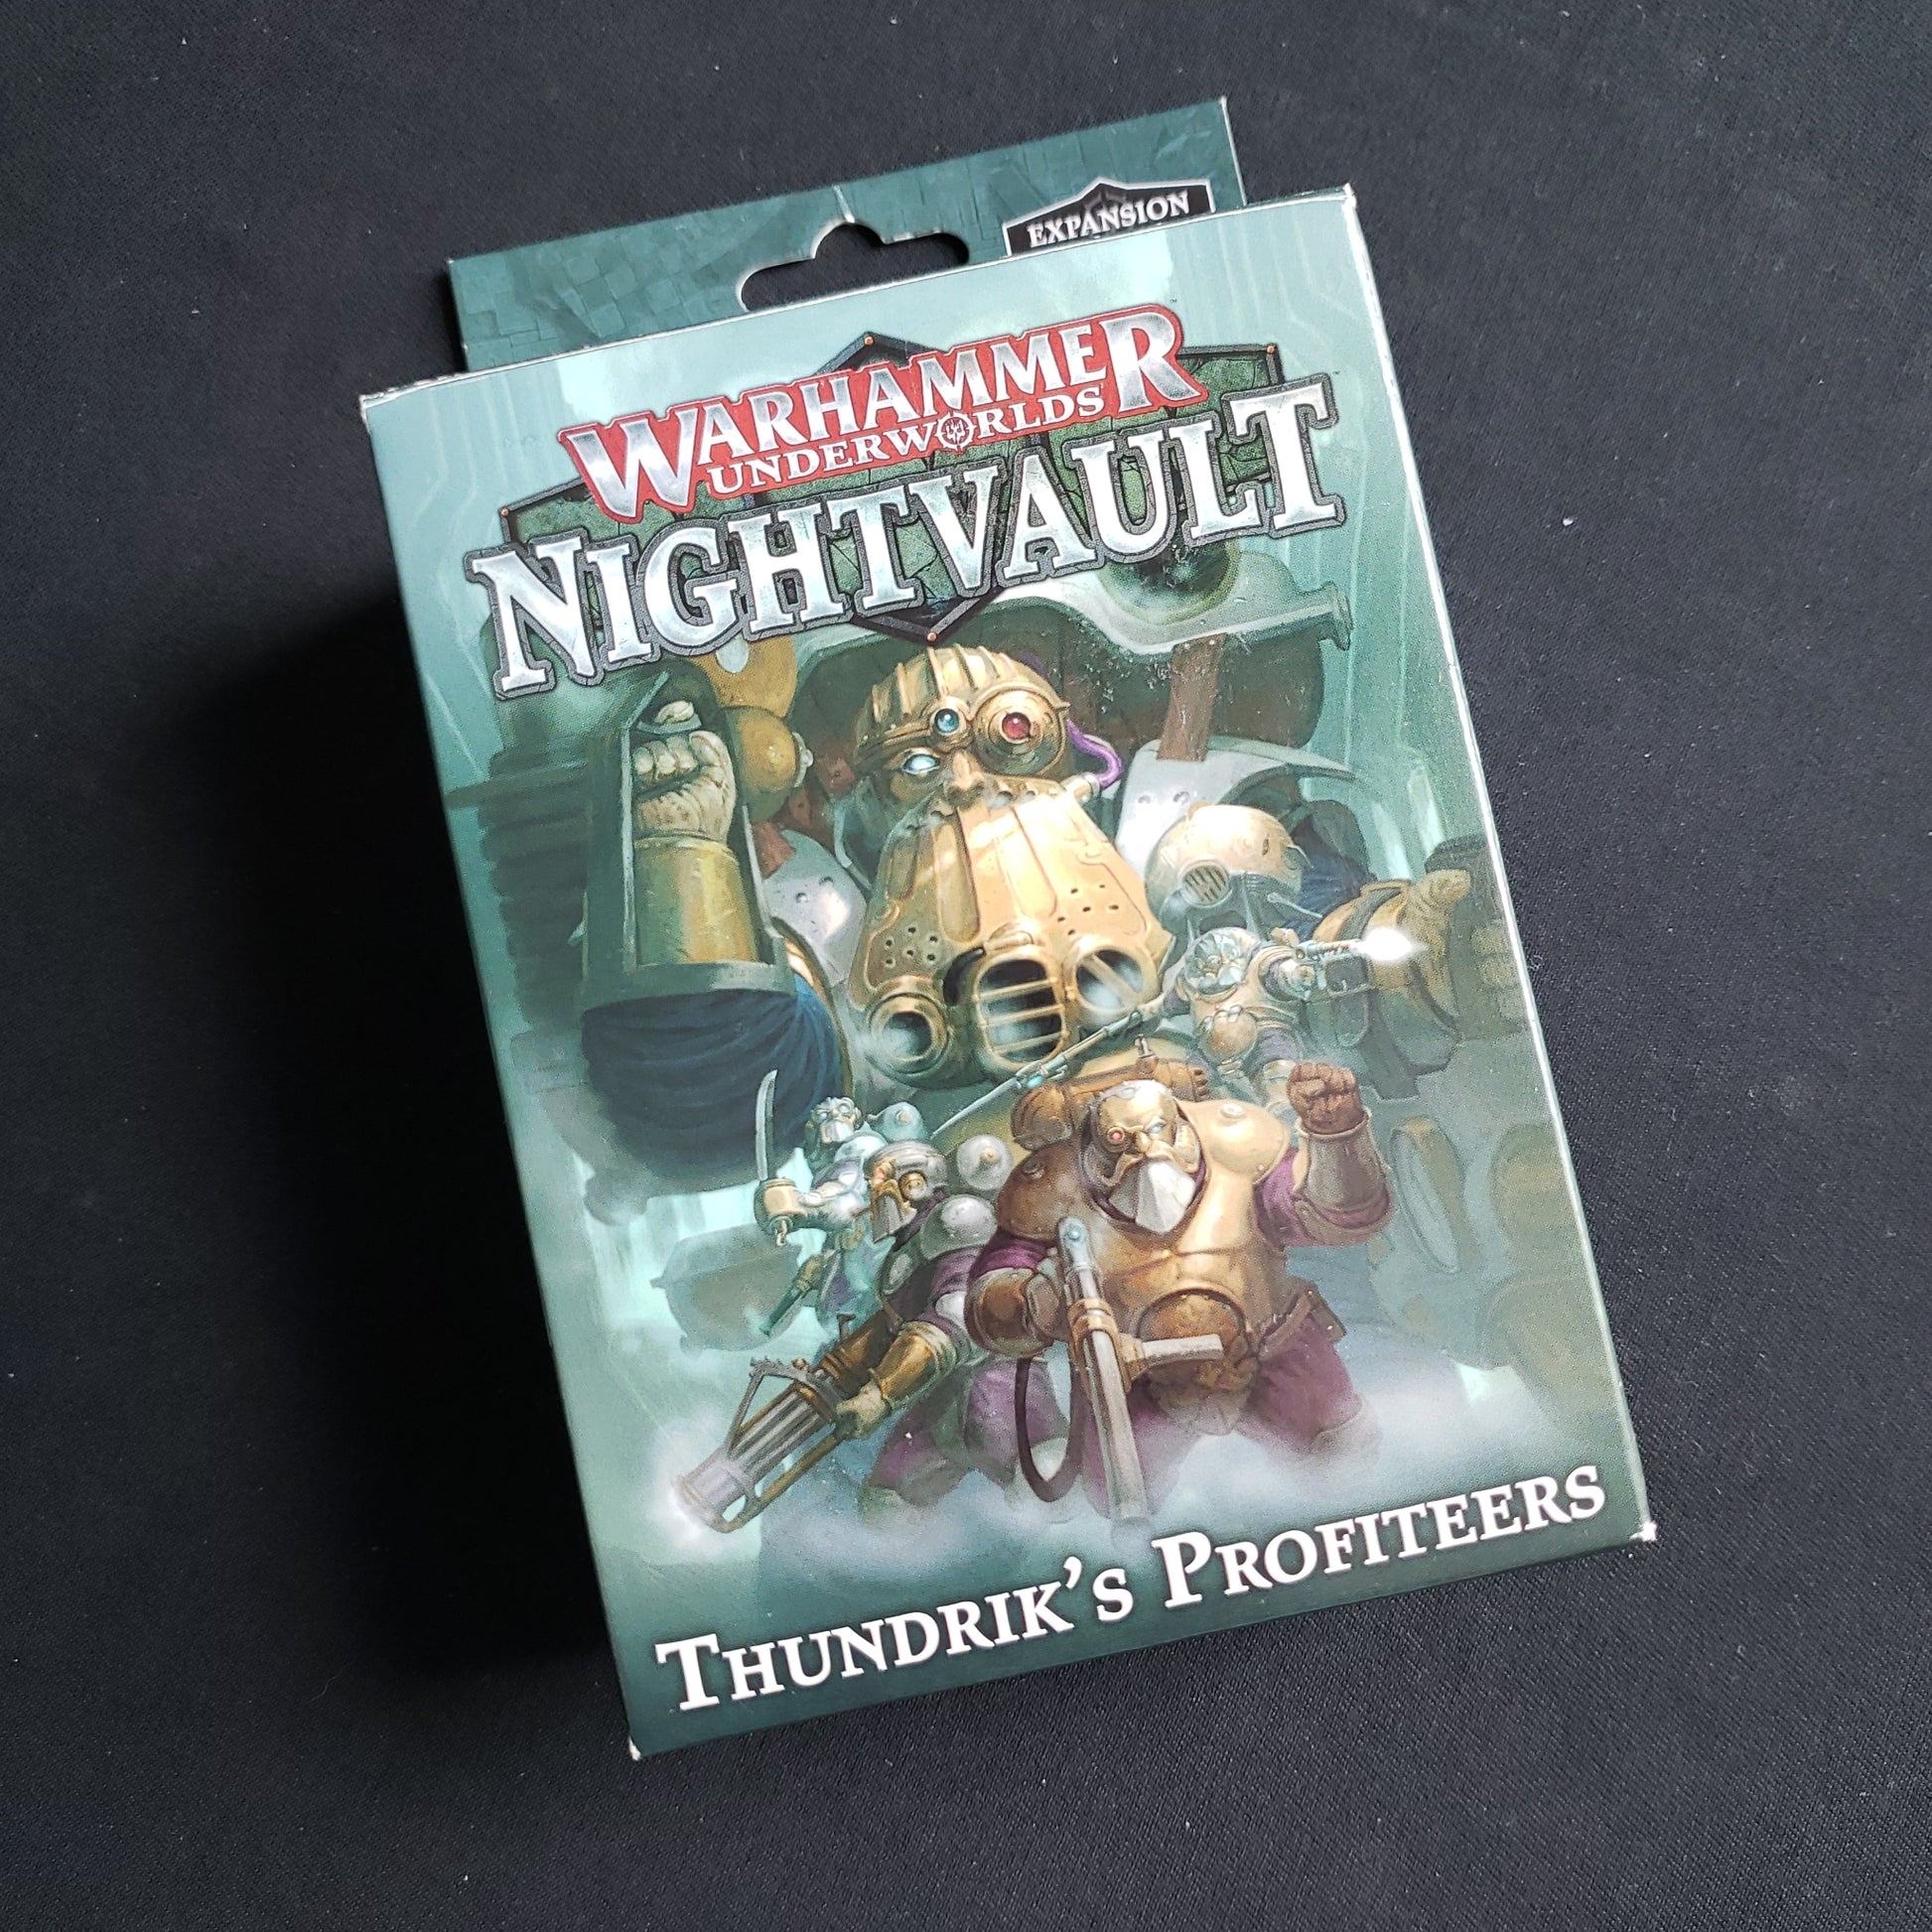 Image shows the front cover of the box of the Thundrik's Profiteers expansion for the Warhammer Underworlds: Nightvault board game